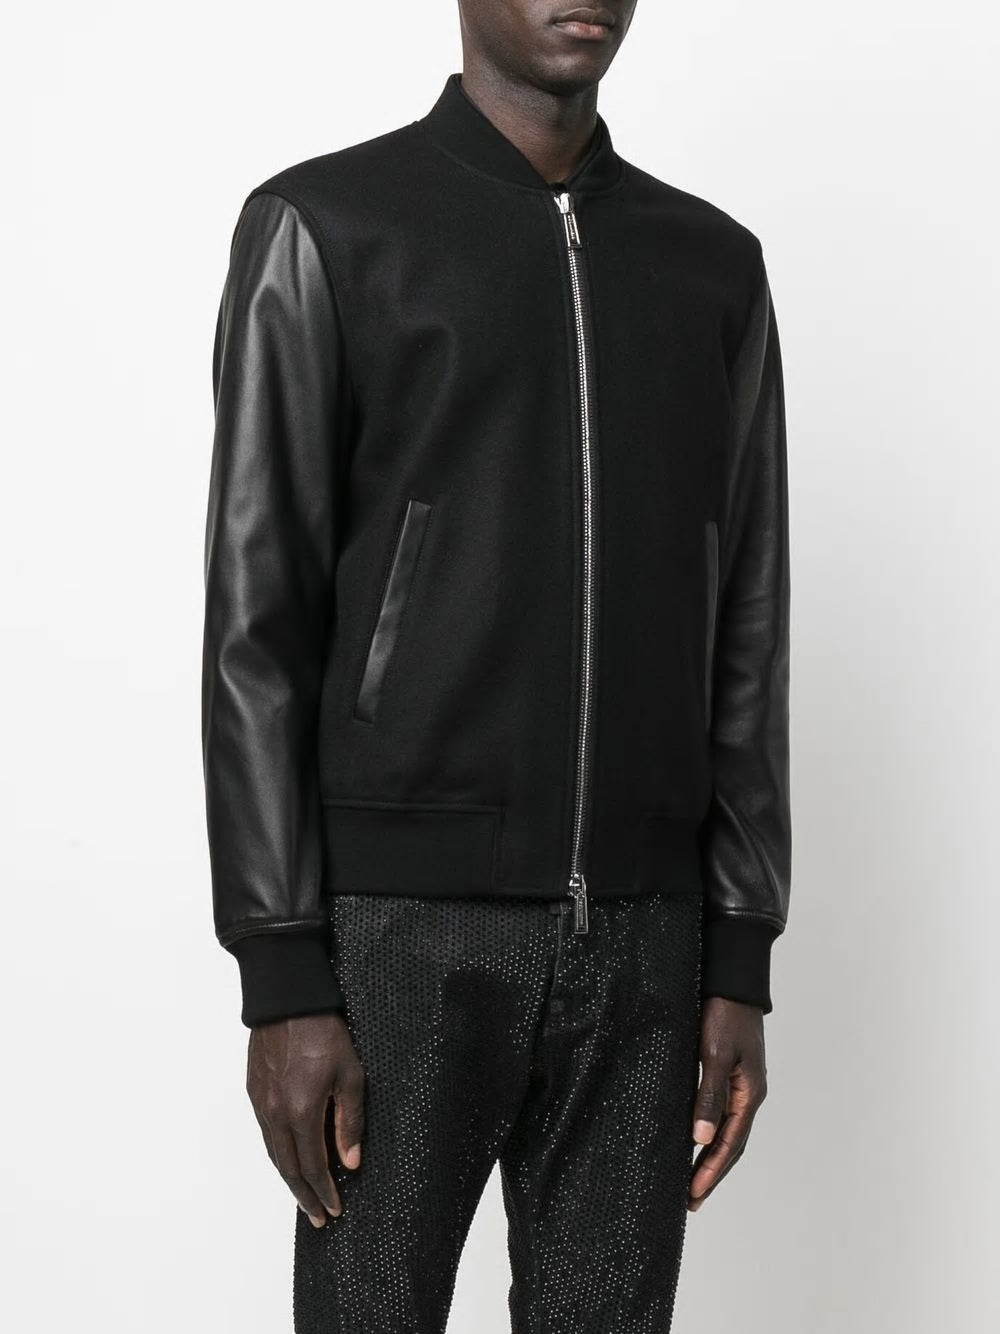 DSQUARED2 Black Wool Blend Men's Sports Jacket | FW22 Collection